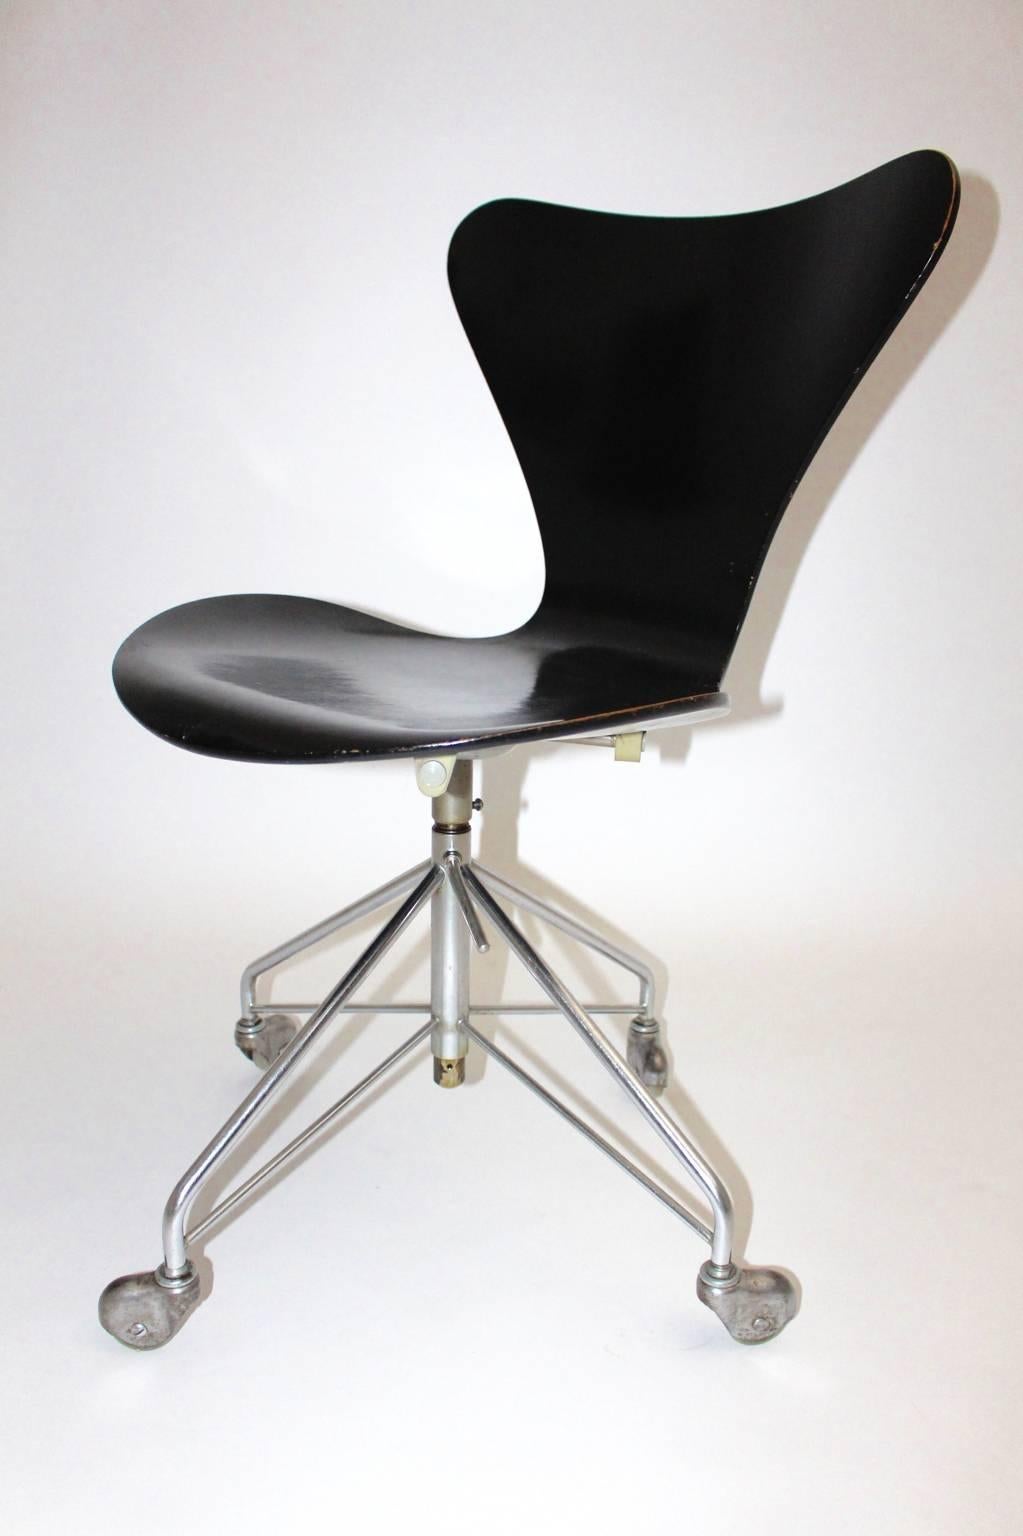 1950s office chair